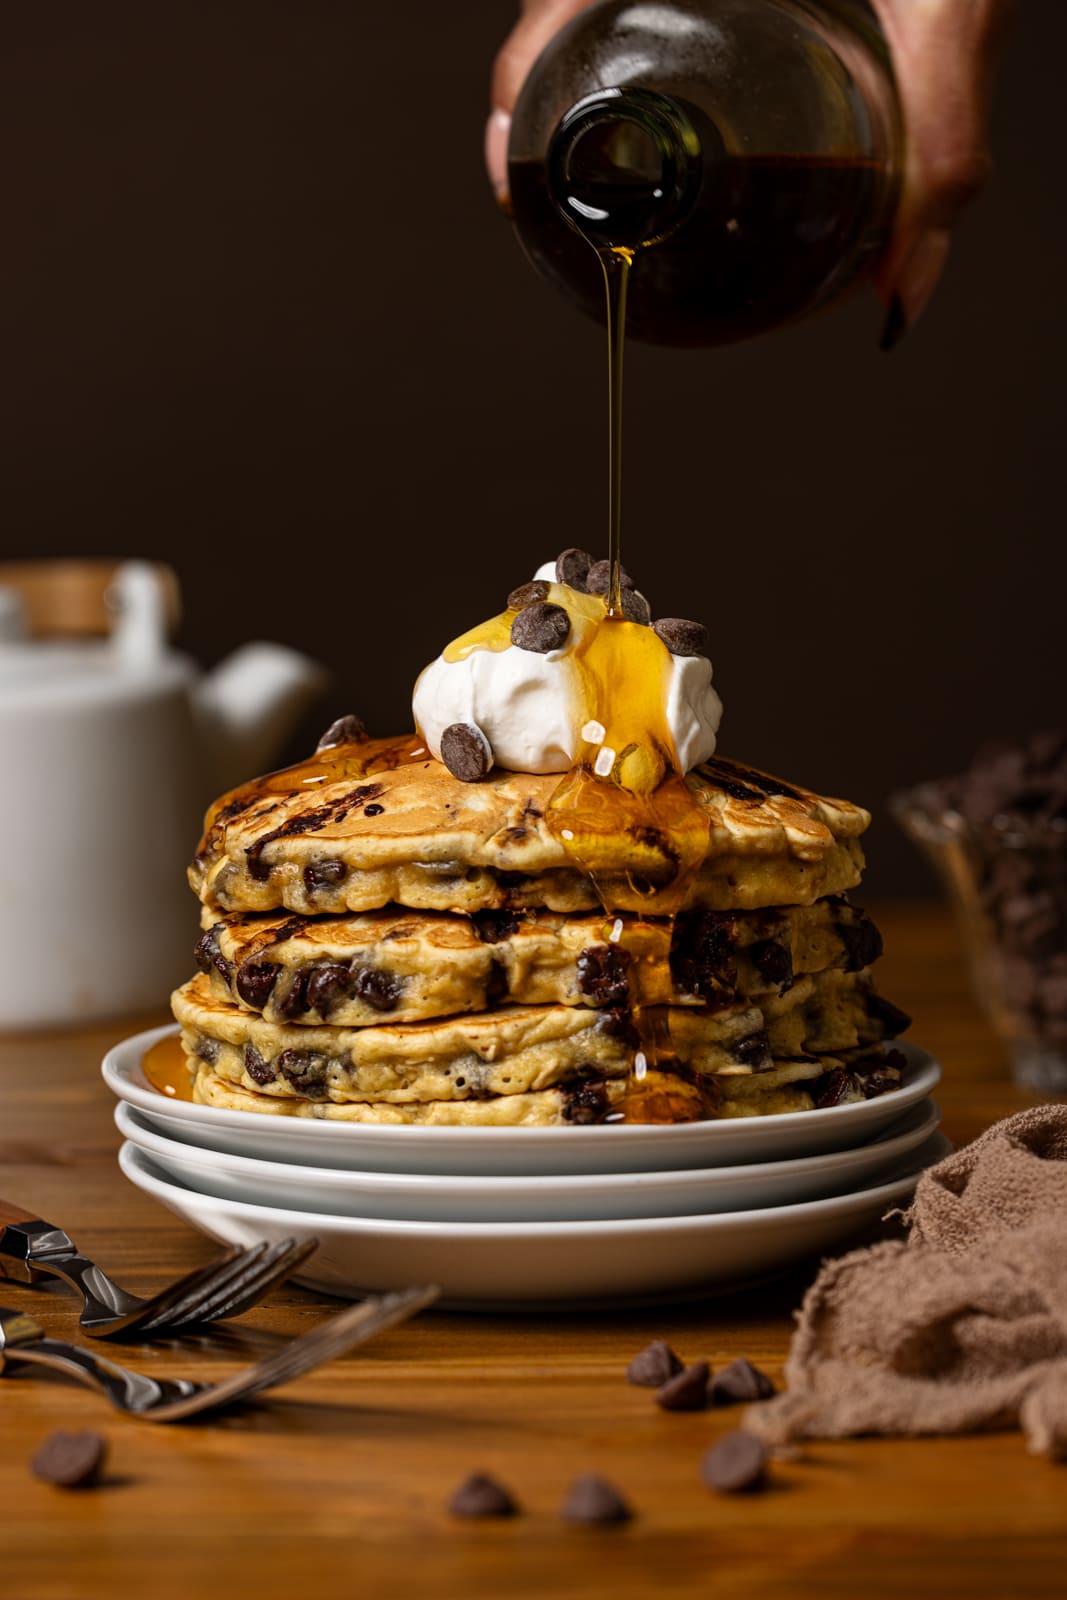 Syrup being poured on a stack of pancakes with whipped cream and chocolate chips.